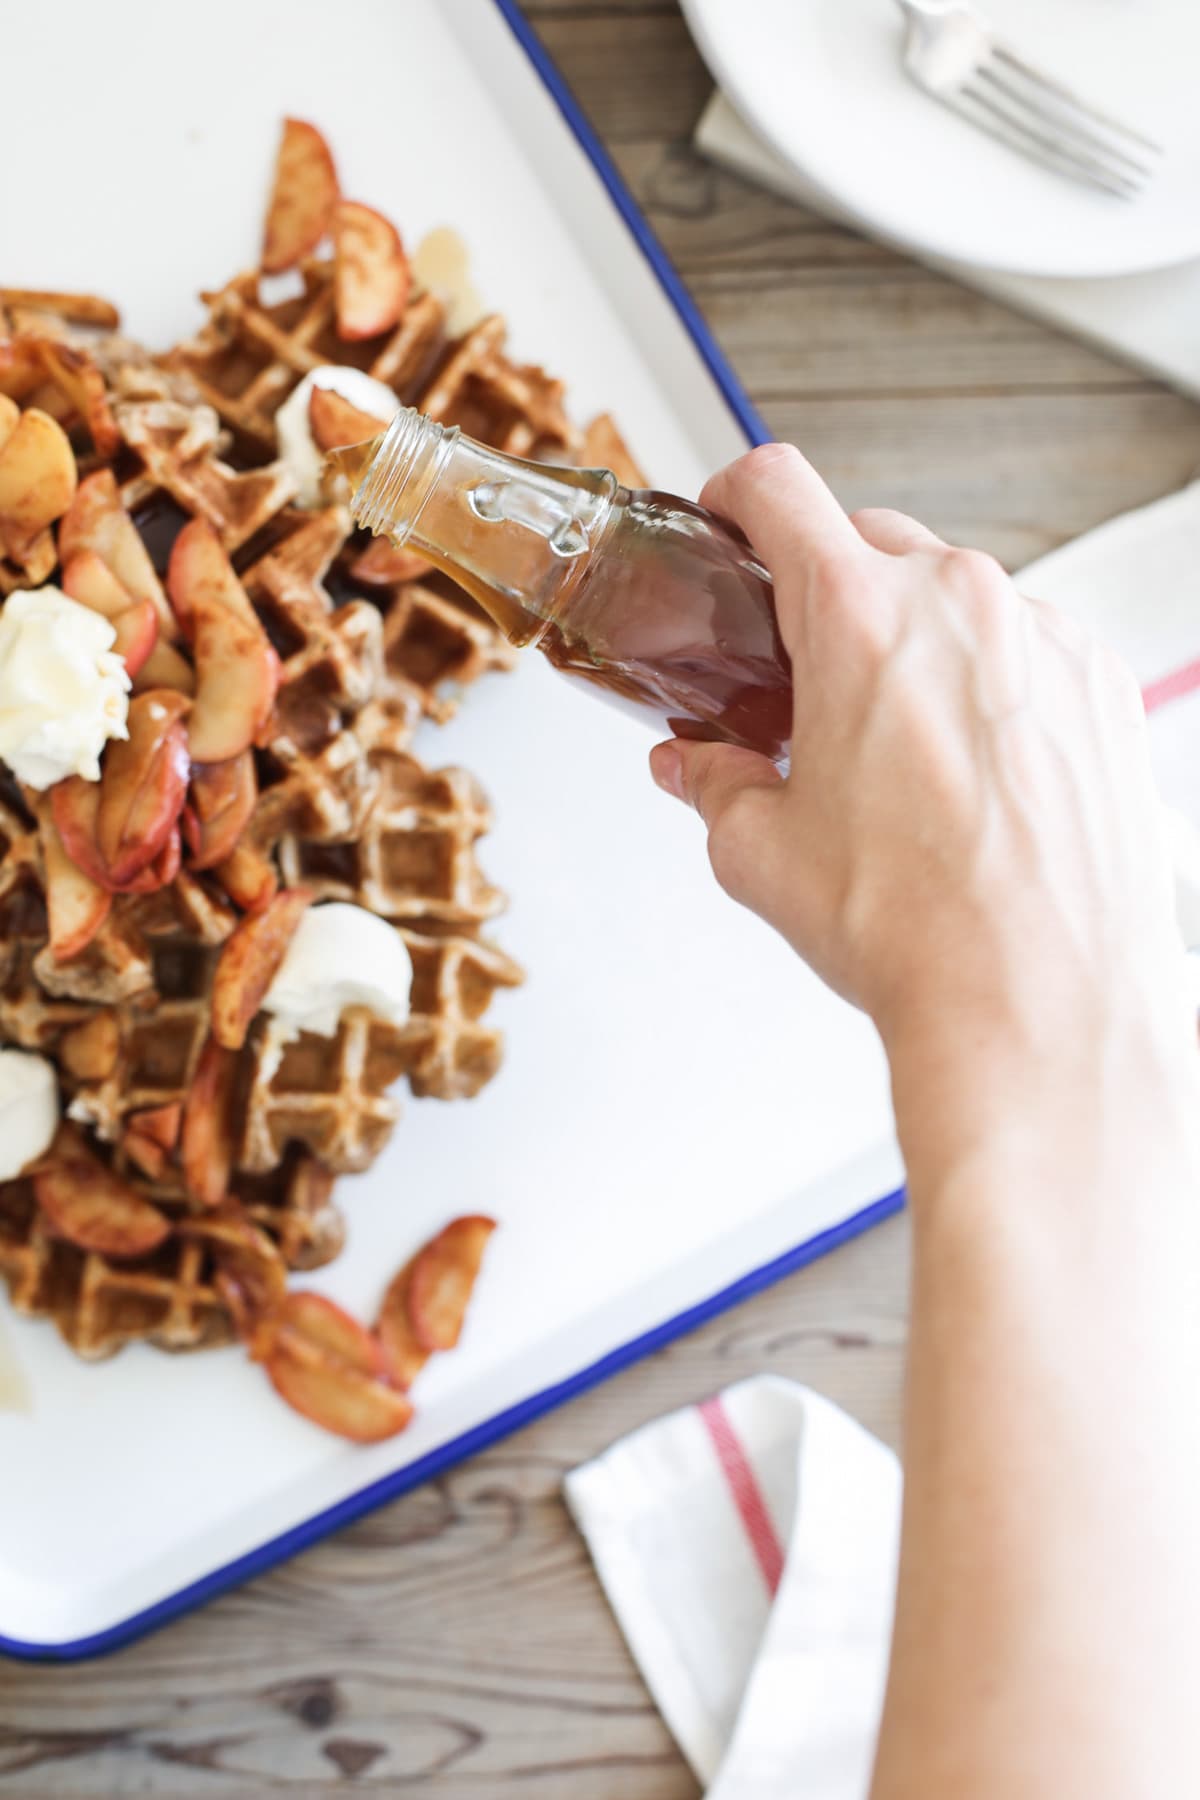 Spiced Cinnamon Apple Waffles with Bourbon Syrup by Ashley Rose of Sugar & Cloth, a top lifestyle blog in Houston, Texas